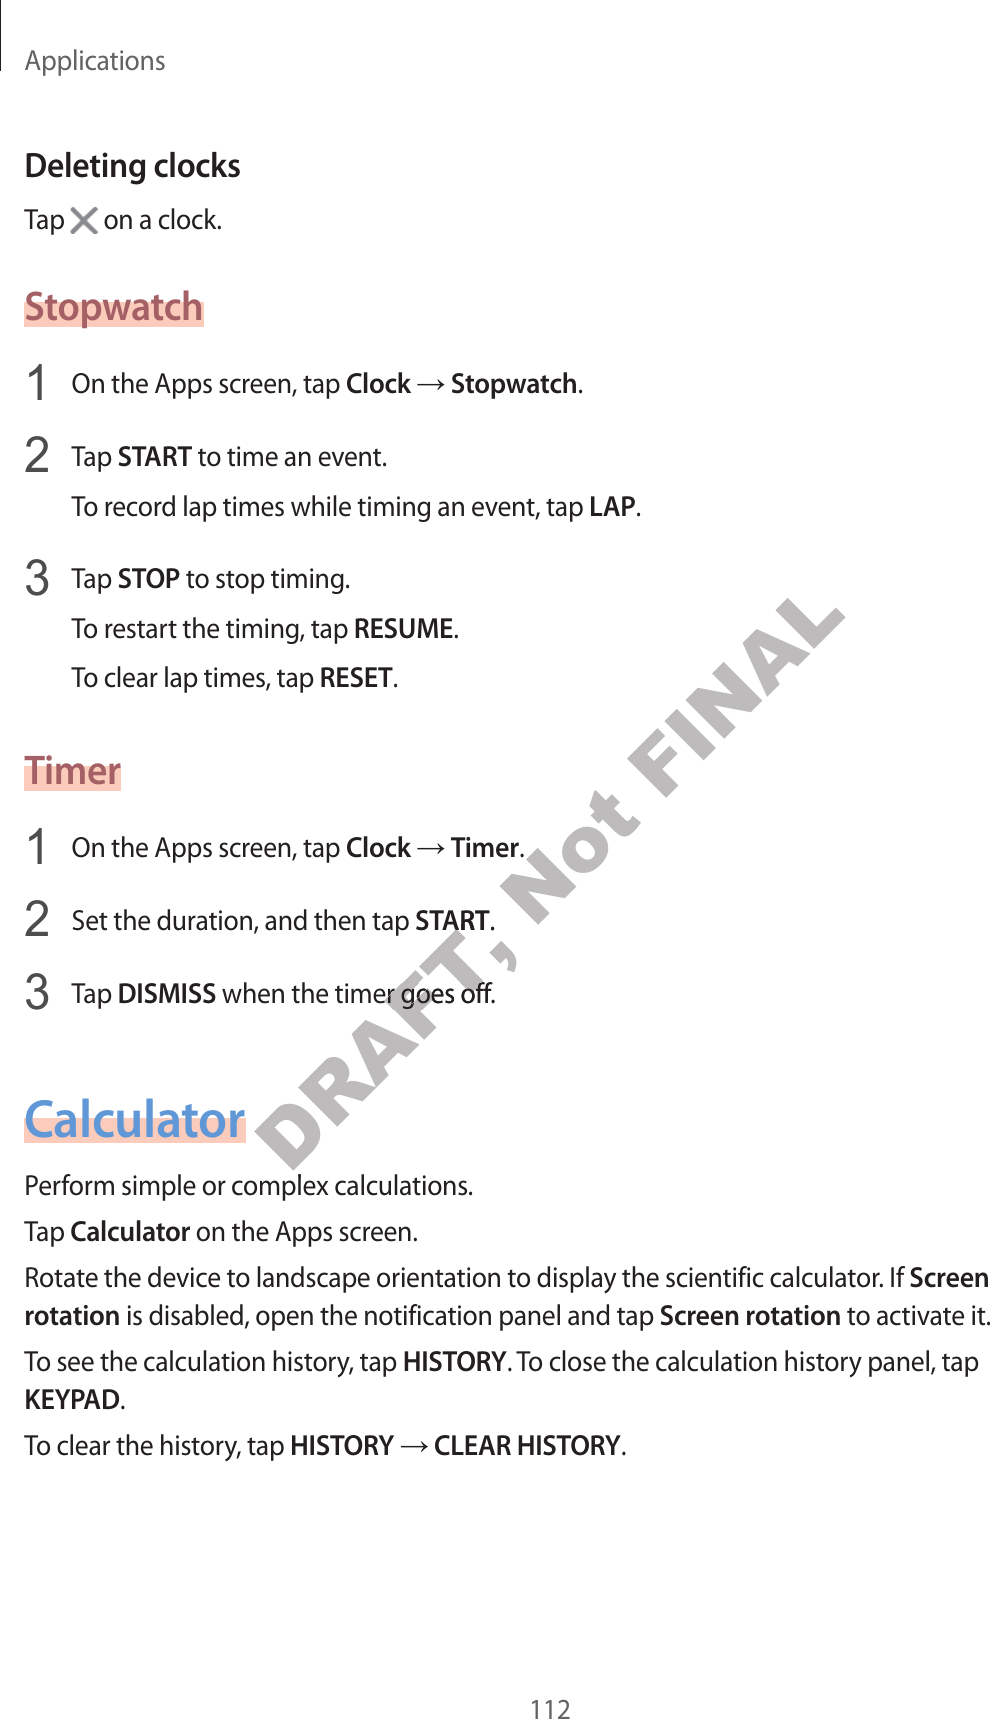 Applications112Deleting clocksTap   on a clock.Stopwatch1  On the Apps screen, tap Clock ĺ Stopwatch.2  Tap START to time an event.To record lap times while timing an event, tap LAP.3  Tap STOP to stop timing.To restart the timing, tap RESUME.To clear lap times, tap RESET.Timer1  On the Apps screen, tap Clock ĺ Timer.2  Set the duration, and then tap START.3  Tap DISMISS when the timer goes off.CalculatorPerform simple or complex calculations.Tap Calculator on the Apps screen.Rotate the device to landscape orientation to display the scientific calculator. If Screen rotation is disabled, open the notification panel and tap Screen rotation to activate it.To see the calculation history, tap HISTORY. To close the calculation history panel, tap KEYPAD.To clear the history, tap HISTORY ĺ CLEAR HISTORY.DRAFT, STARTSTAR. when the timer goes off. when the timer goes offomplex calculaNot FINAL